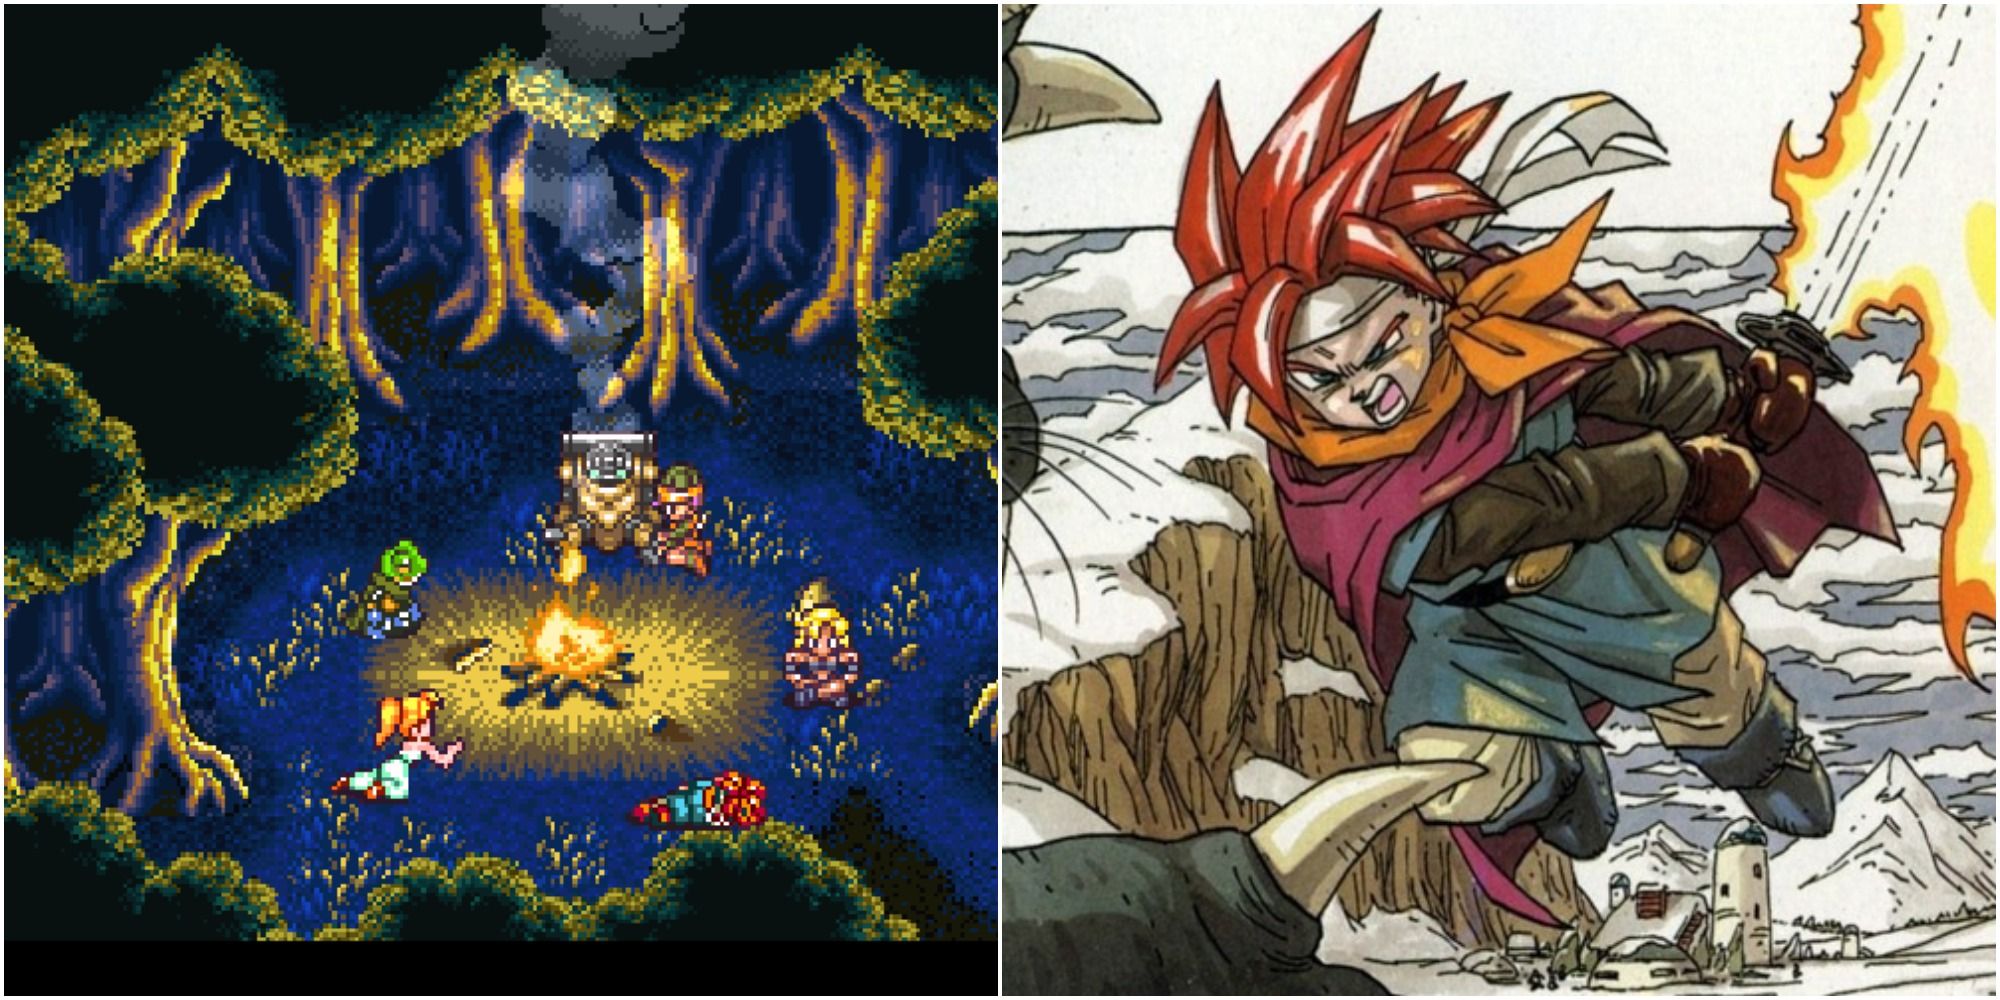 Split image screenshots of the Chrono Trigger around a campfire and a close-up of the game’s box art, showing Crono.